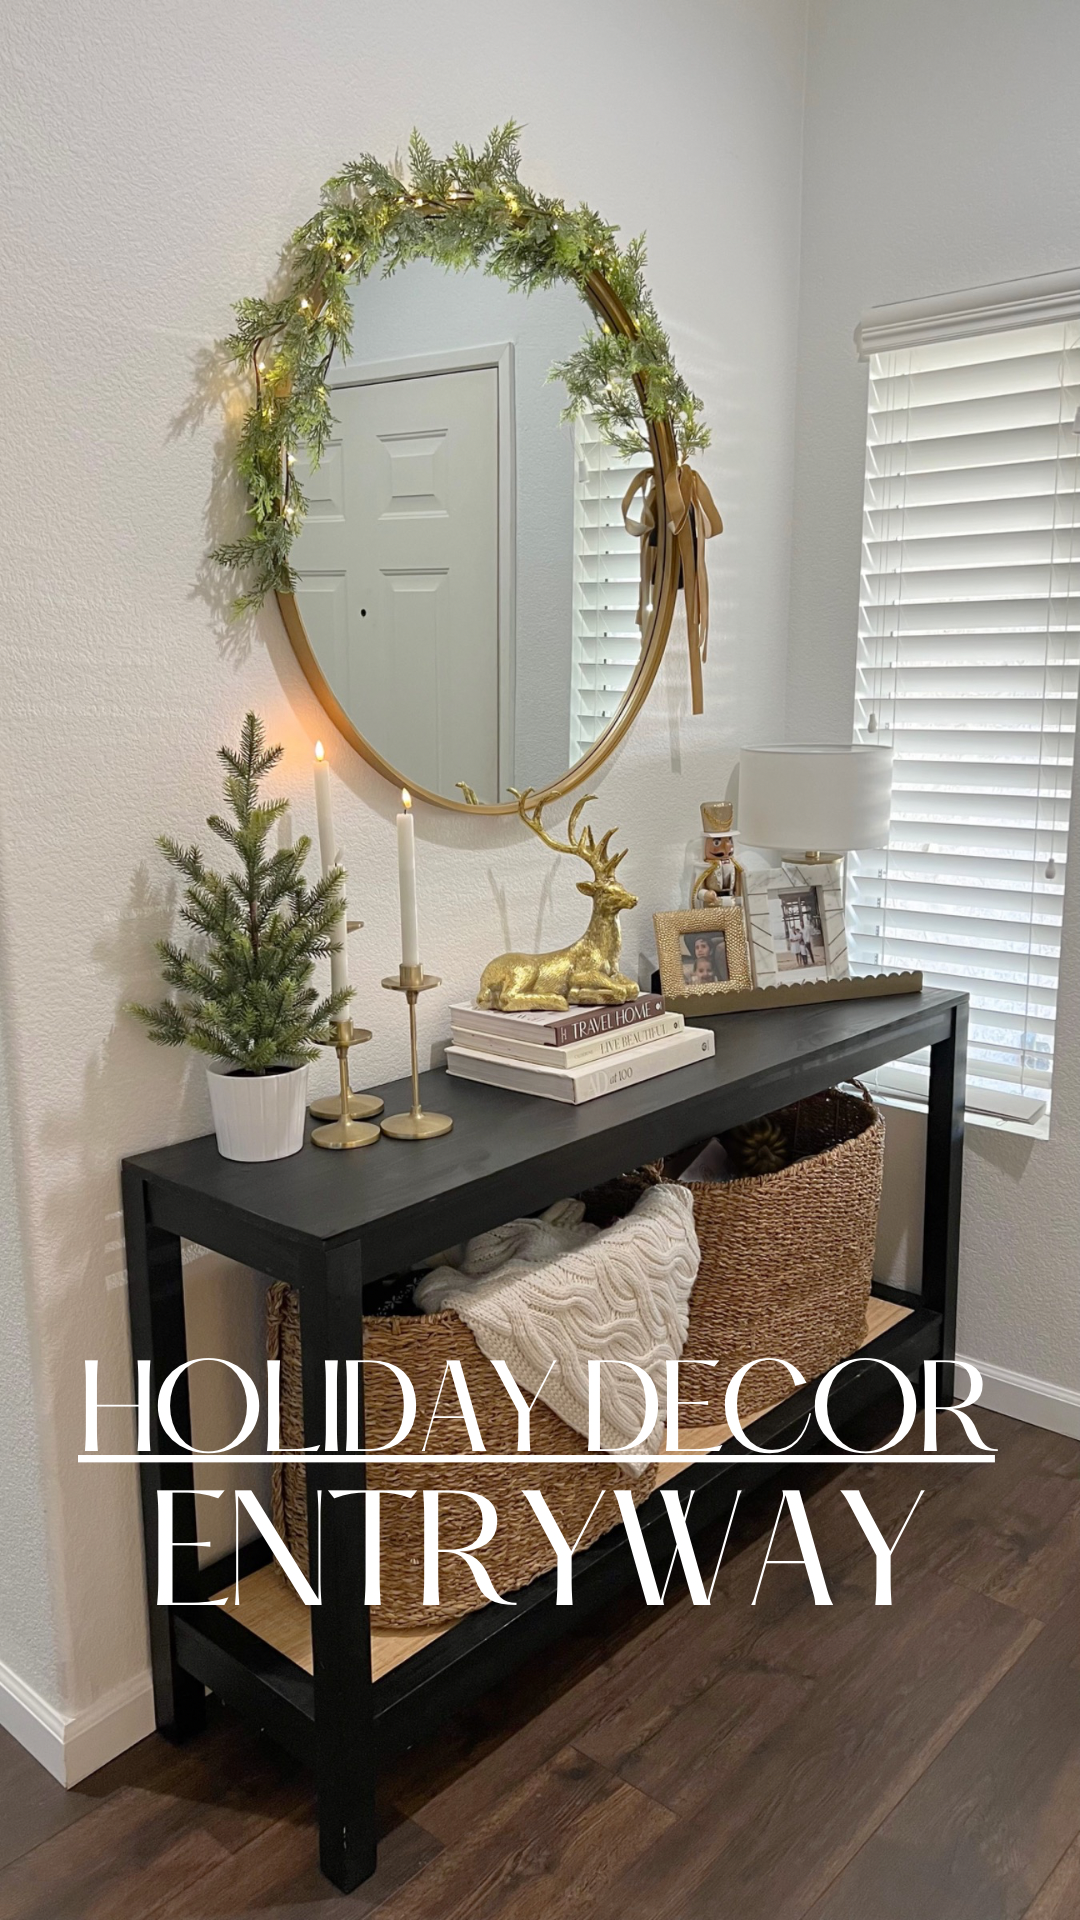 Elegant Entryway Holiday Decor, how to decorate your entryway for the holidays